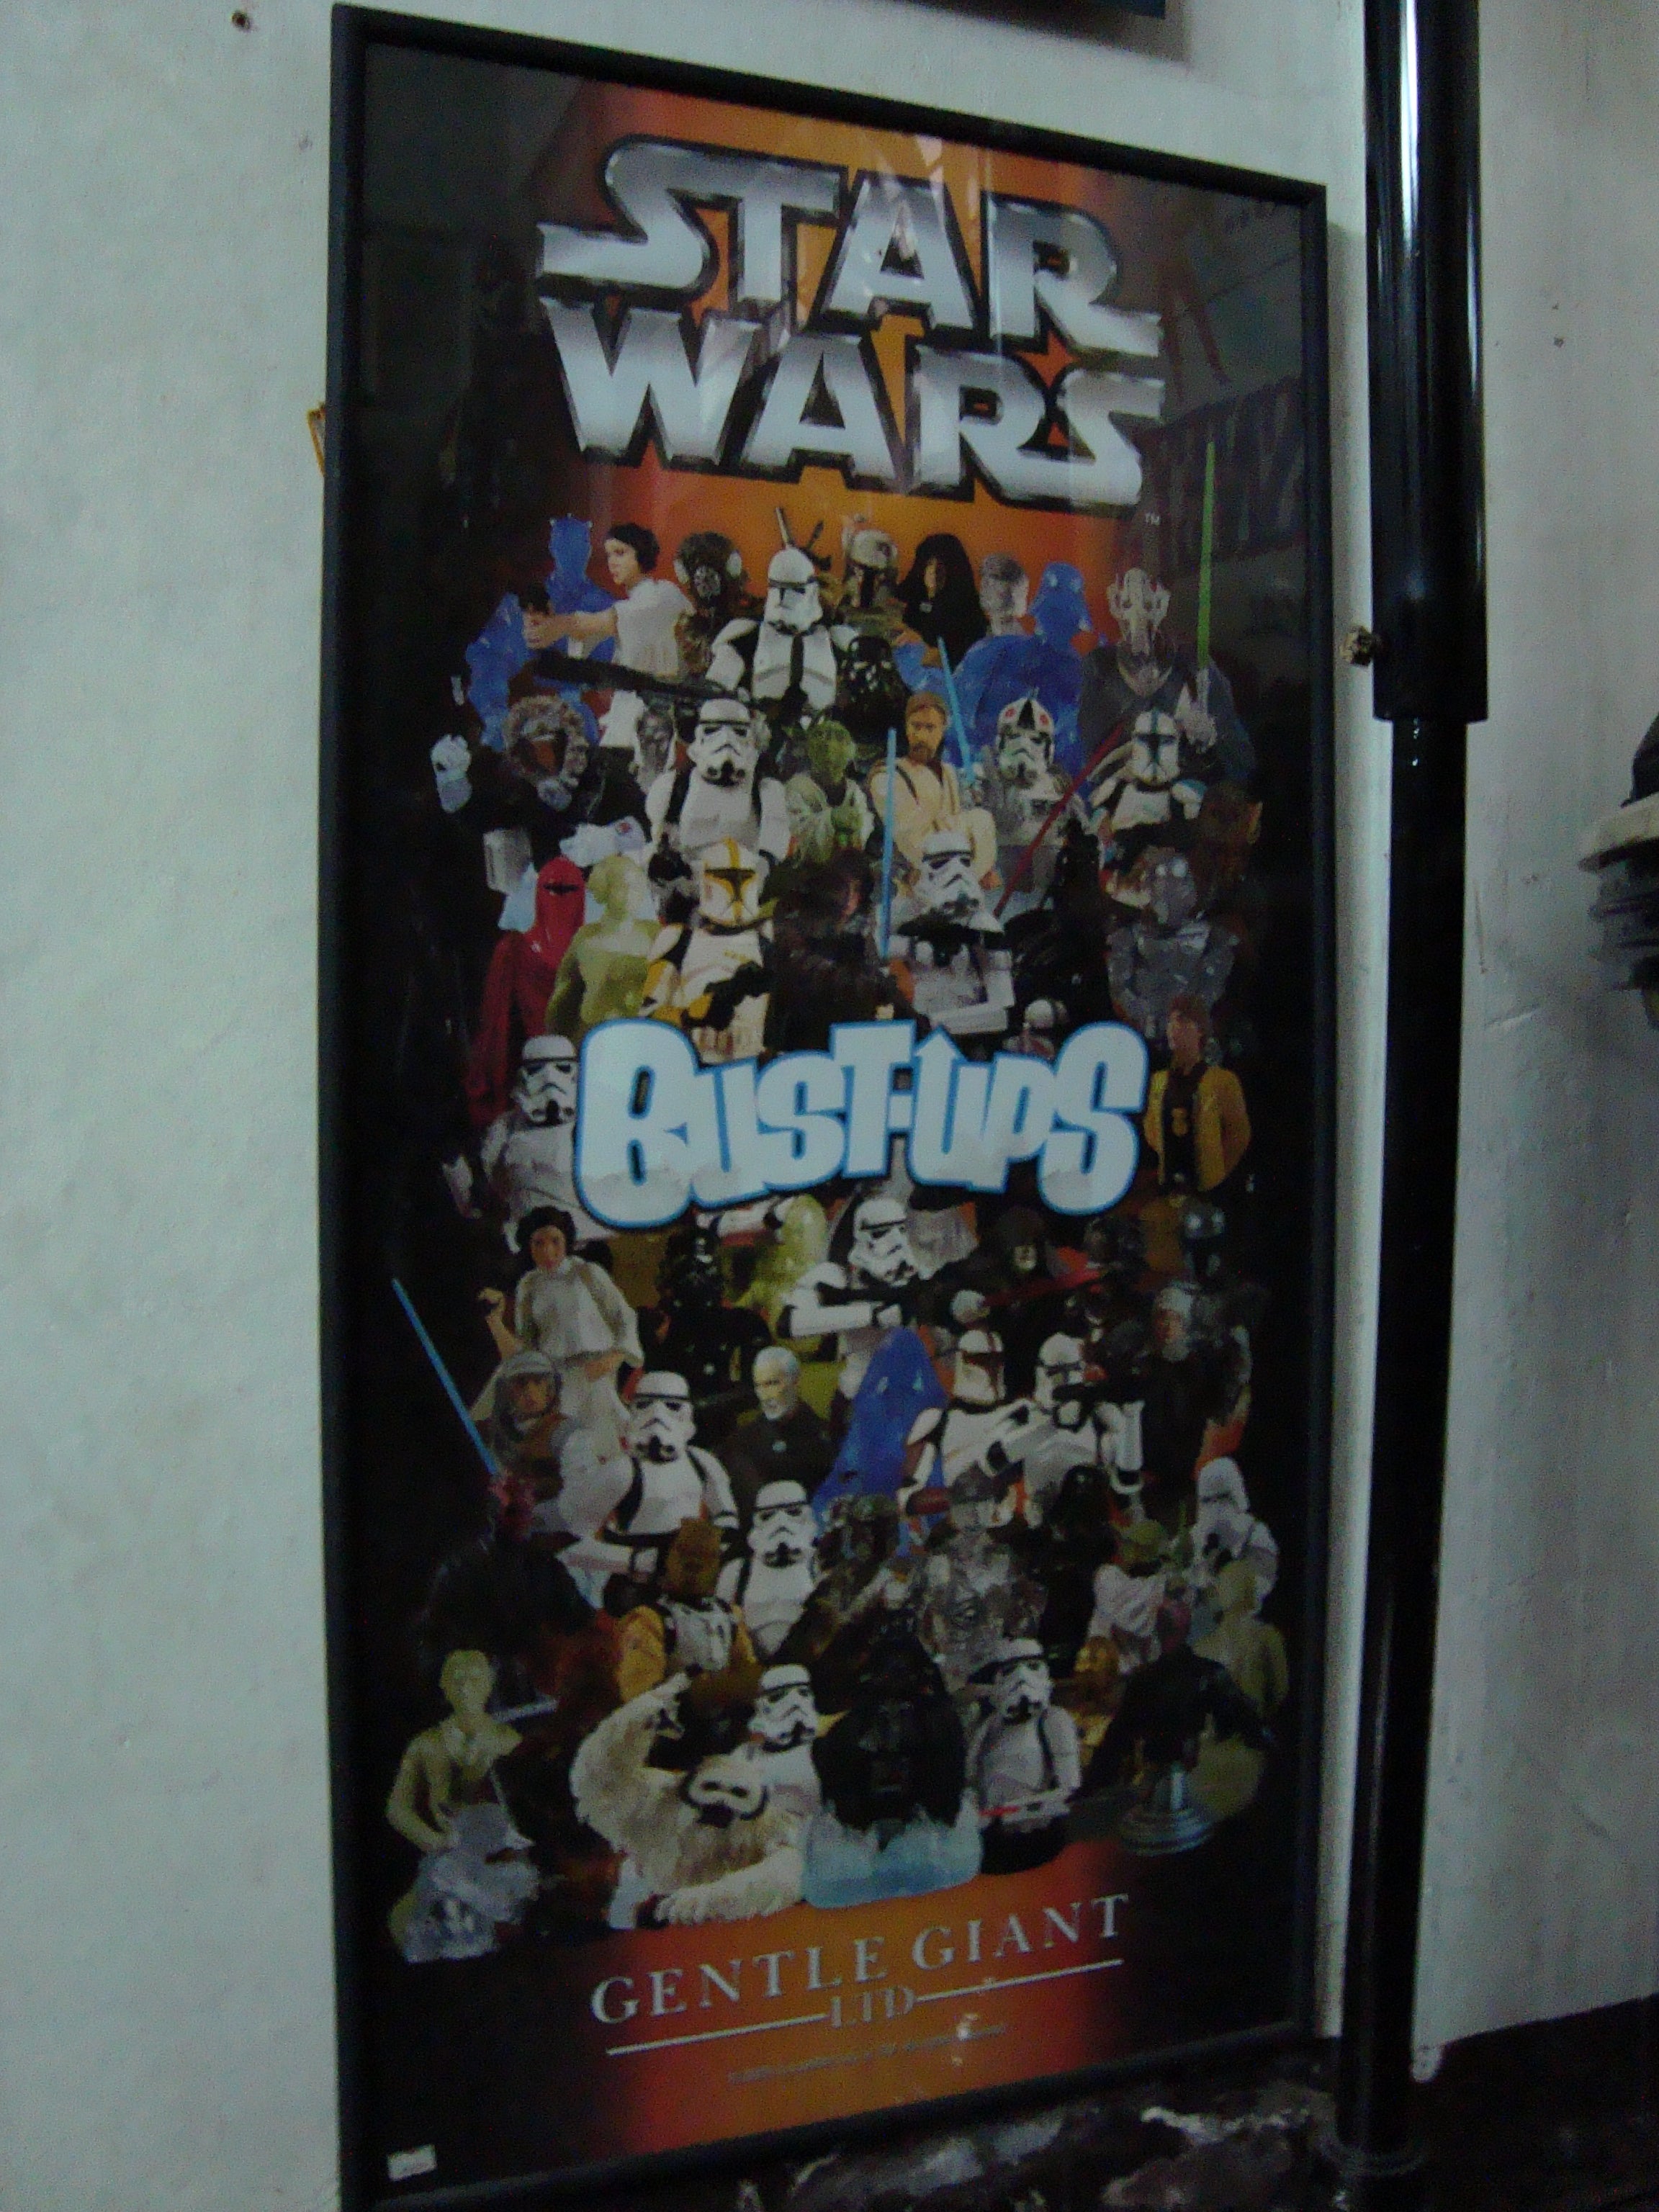 Star Wars Gentle Giant Poster w/Frame